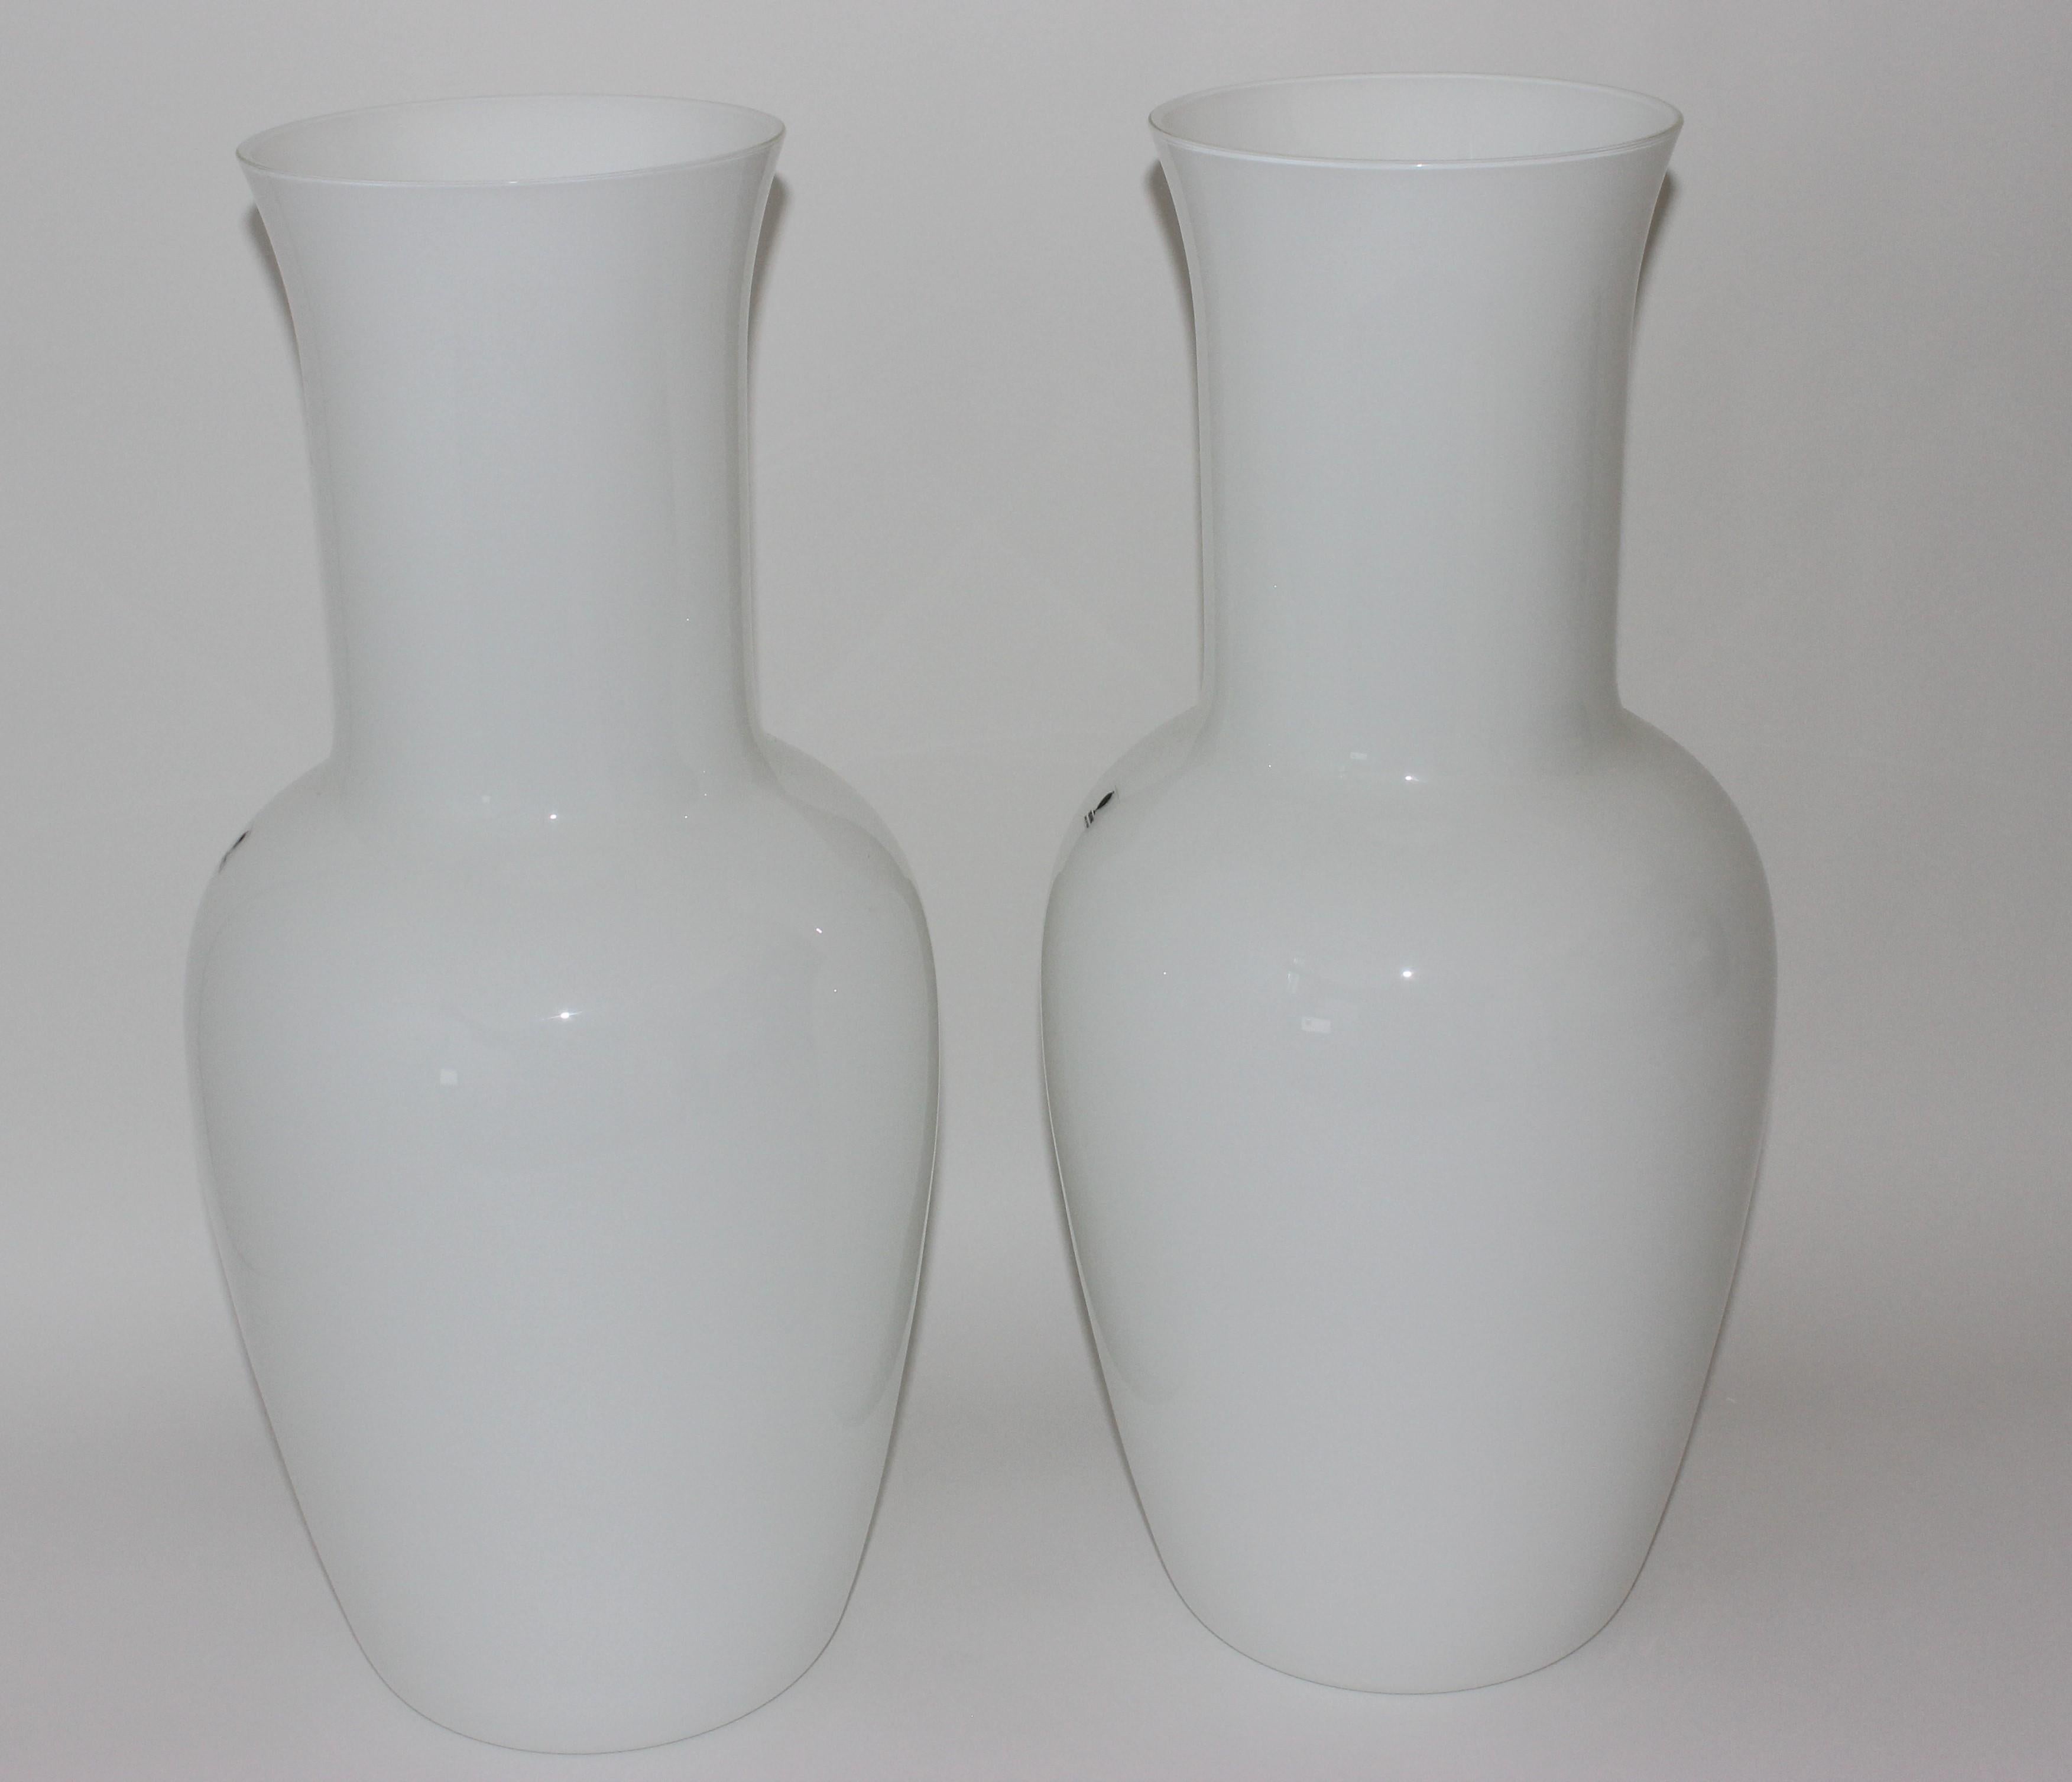 Hand-Crafted Pair of White Venini Murano Glass Vases For Sale